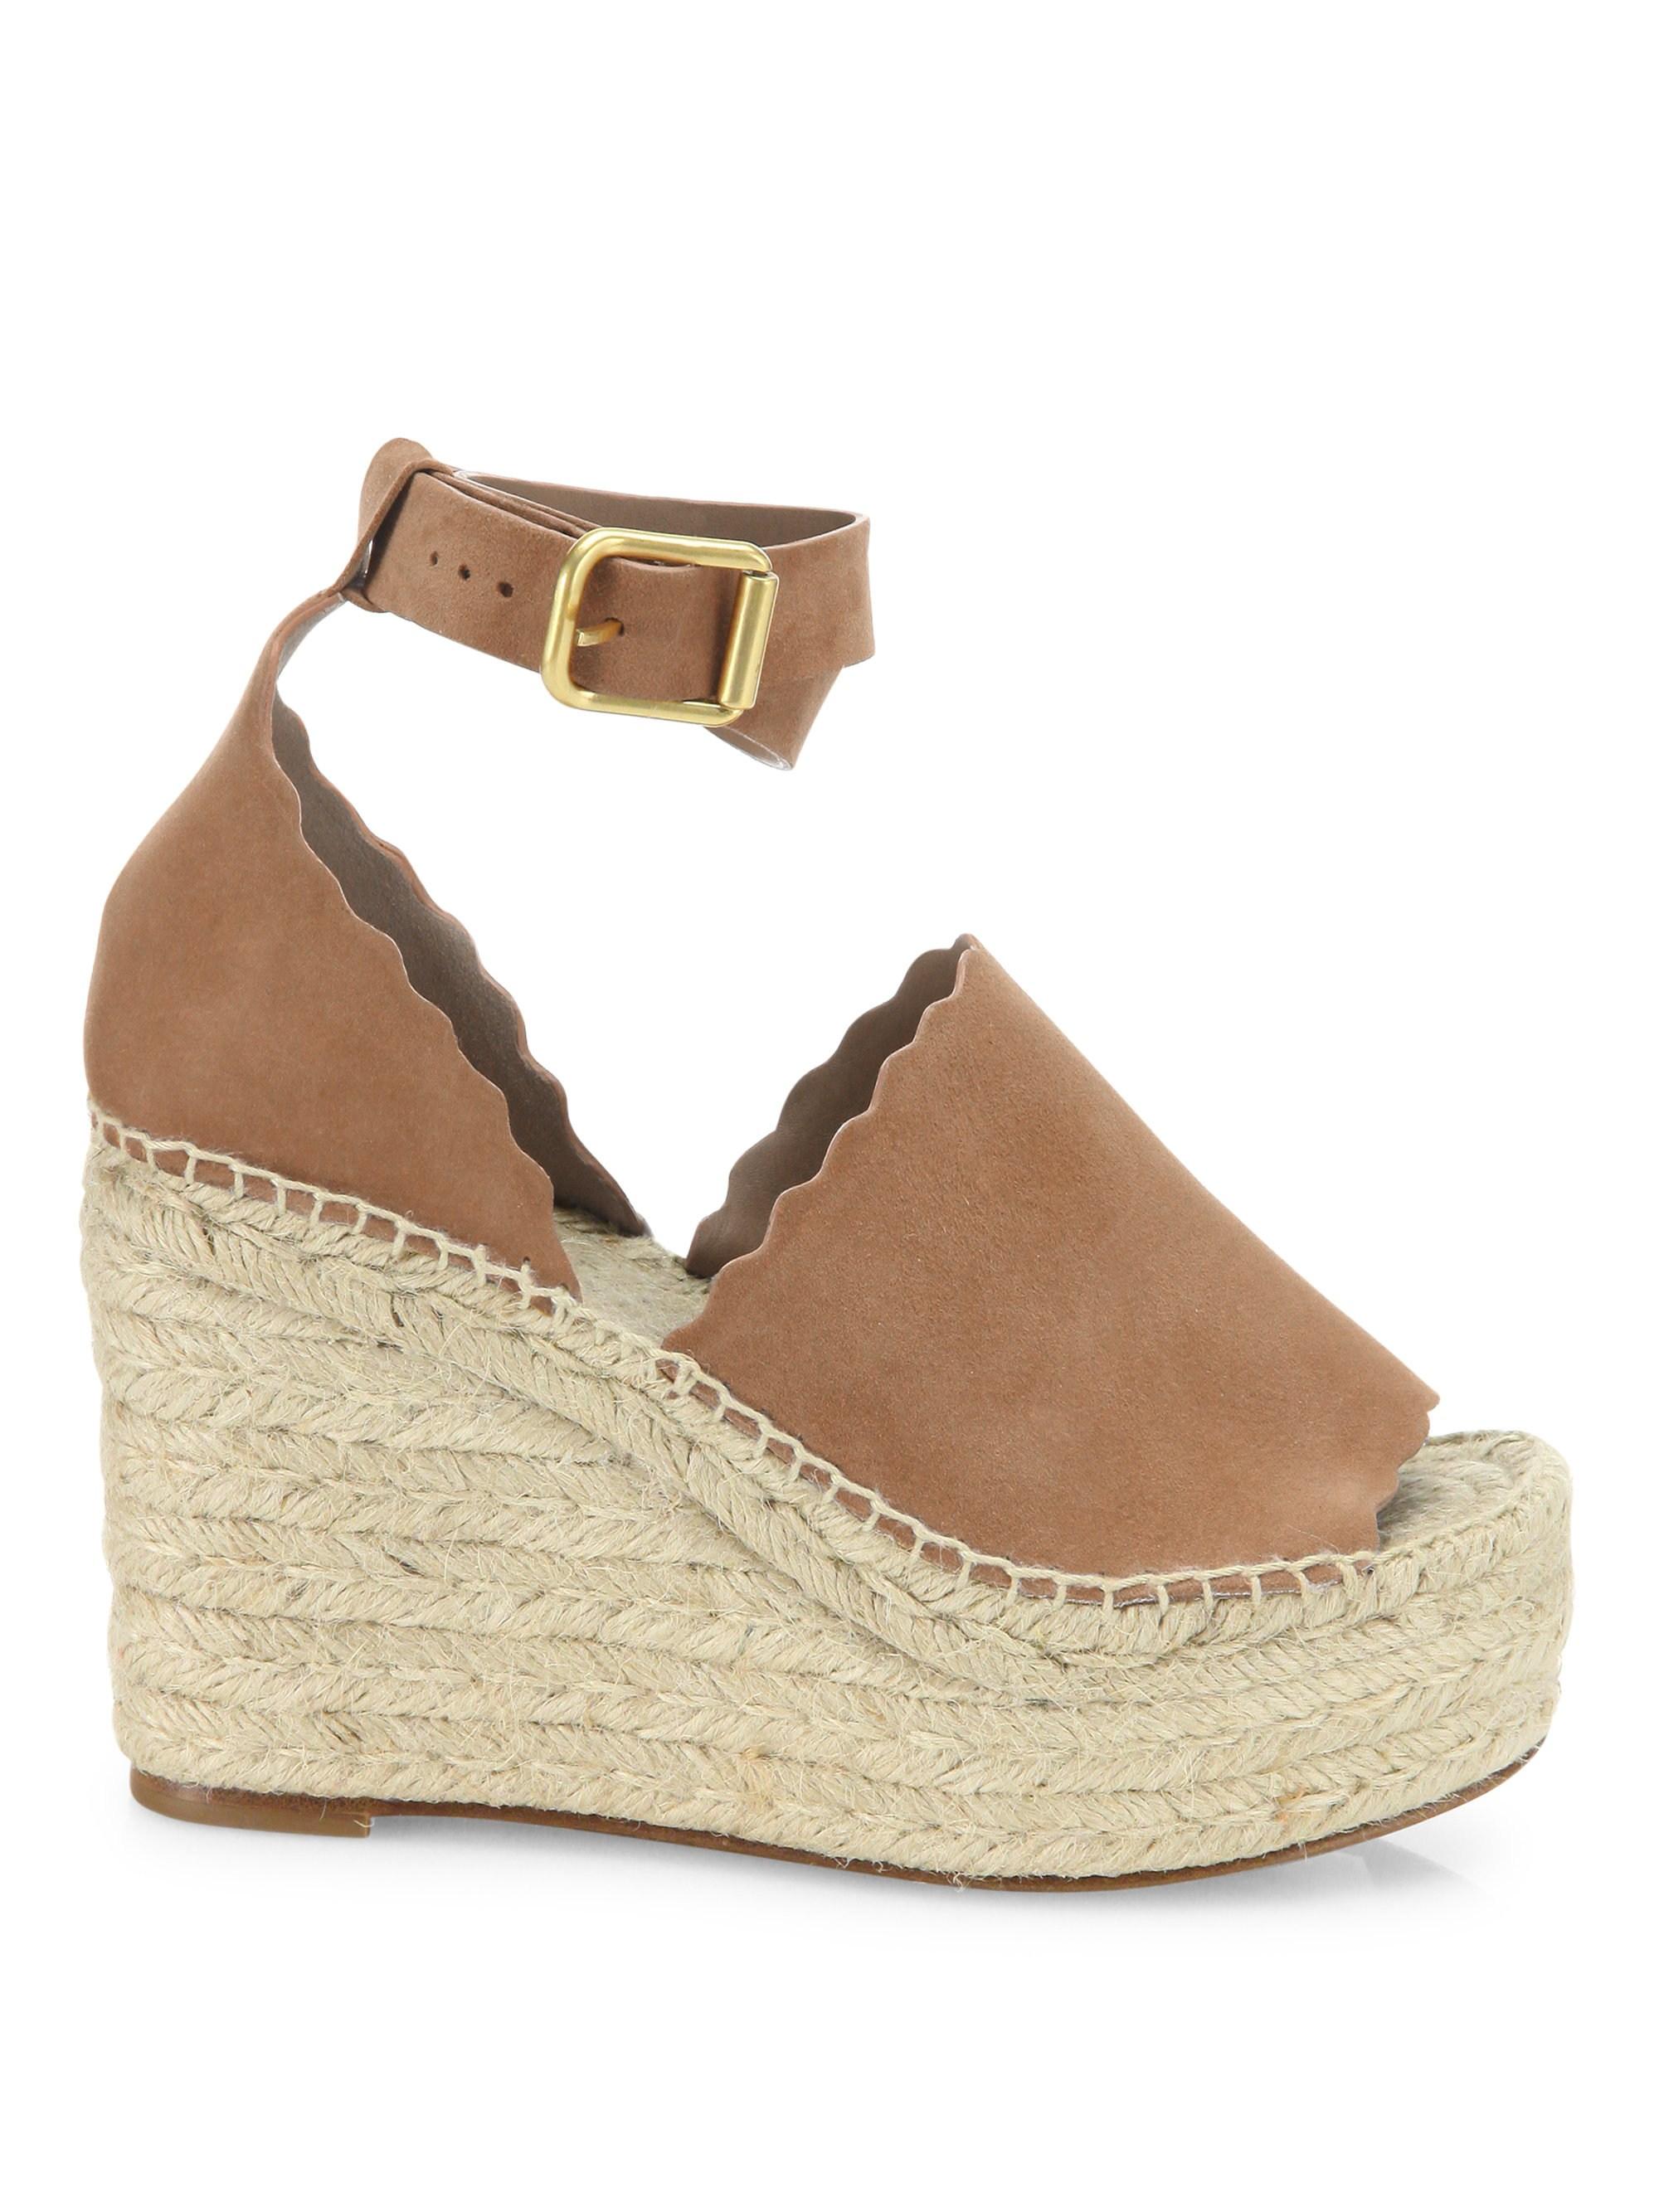 Chloé Lauren Suede Ankle-strap Espadrille Wedge Sandals in Natural - Lyst